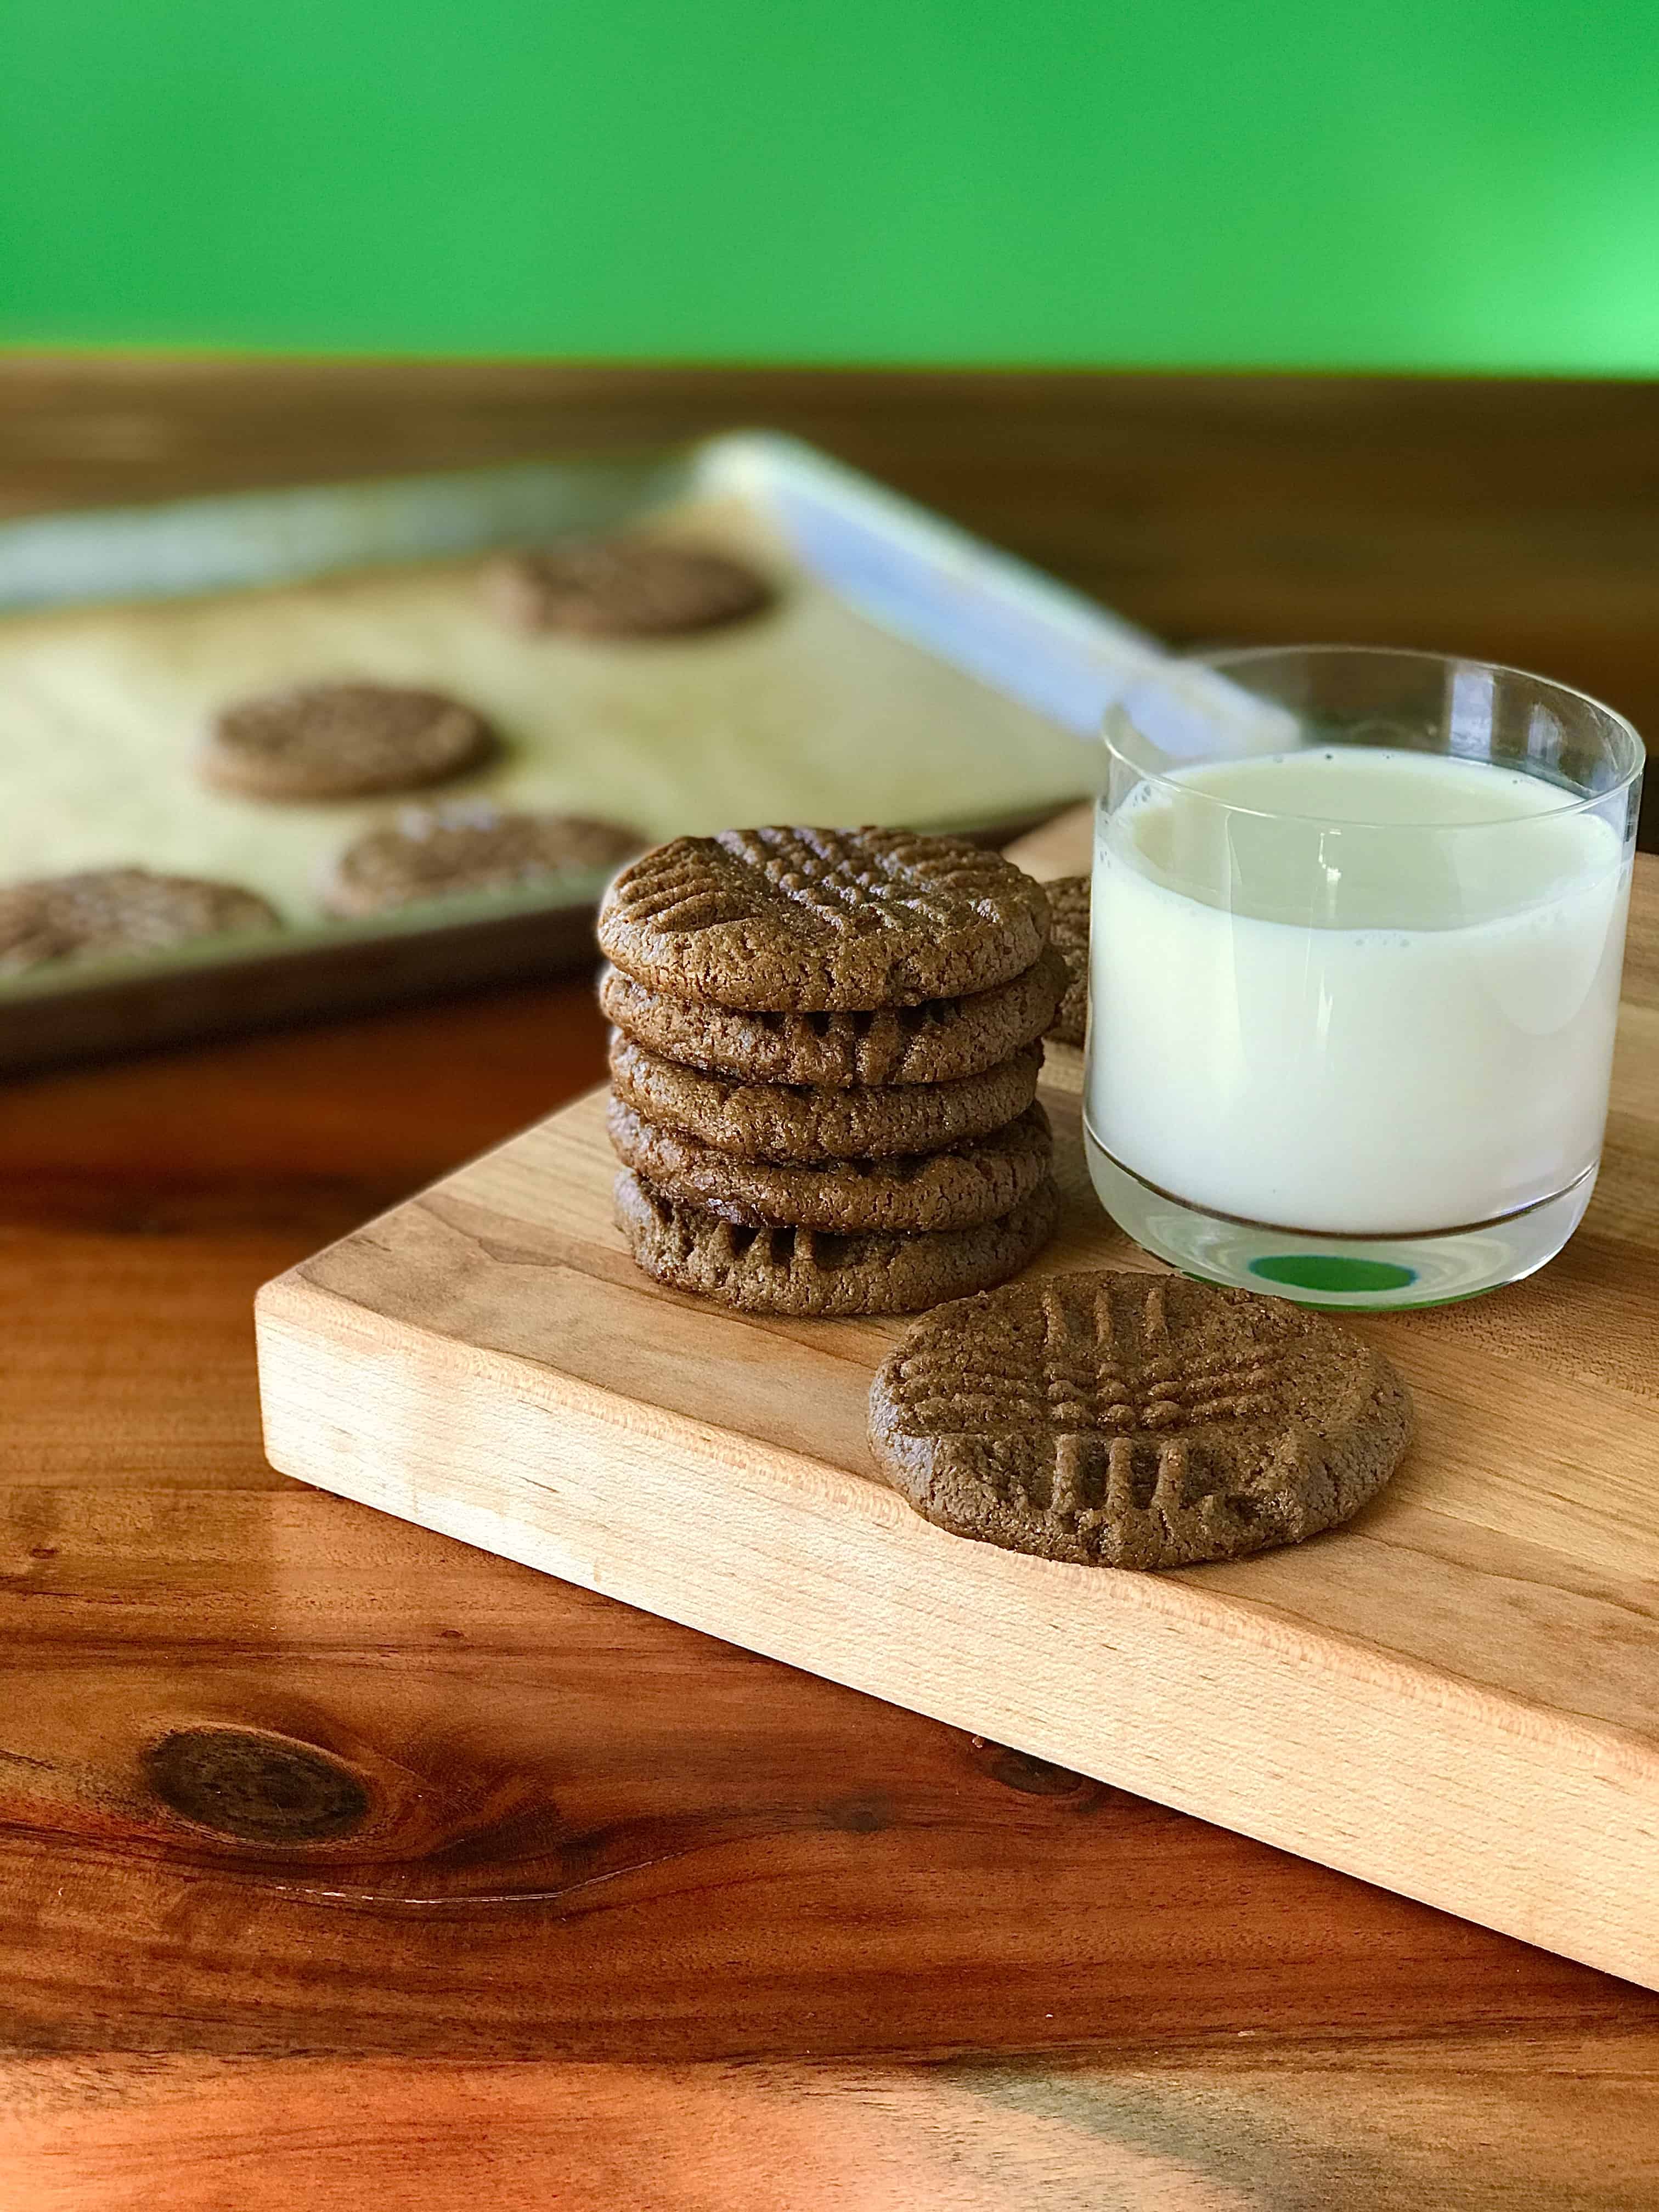 Flourless peanut butter cookies on a wooden cutting board with a glass of milk.